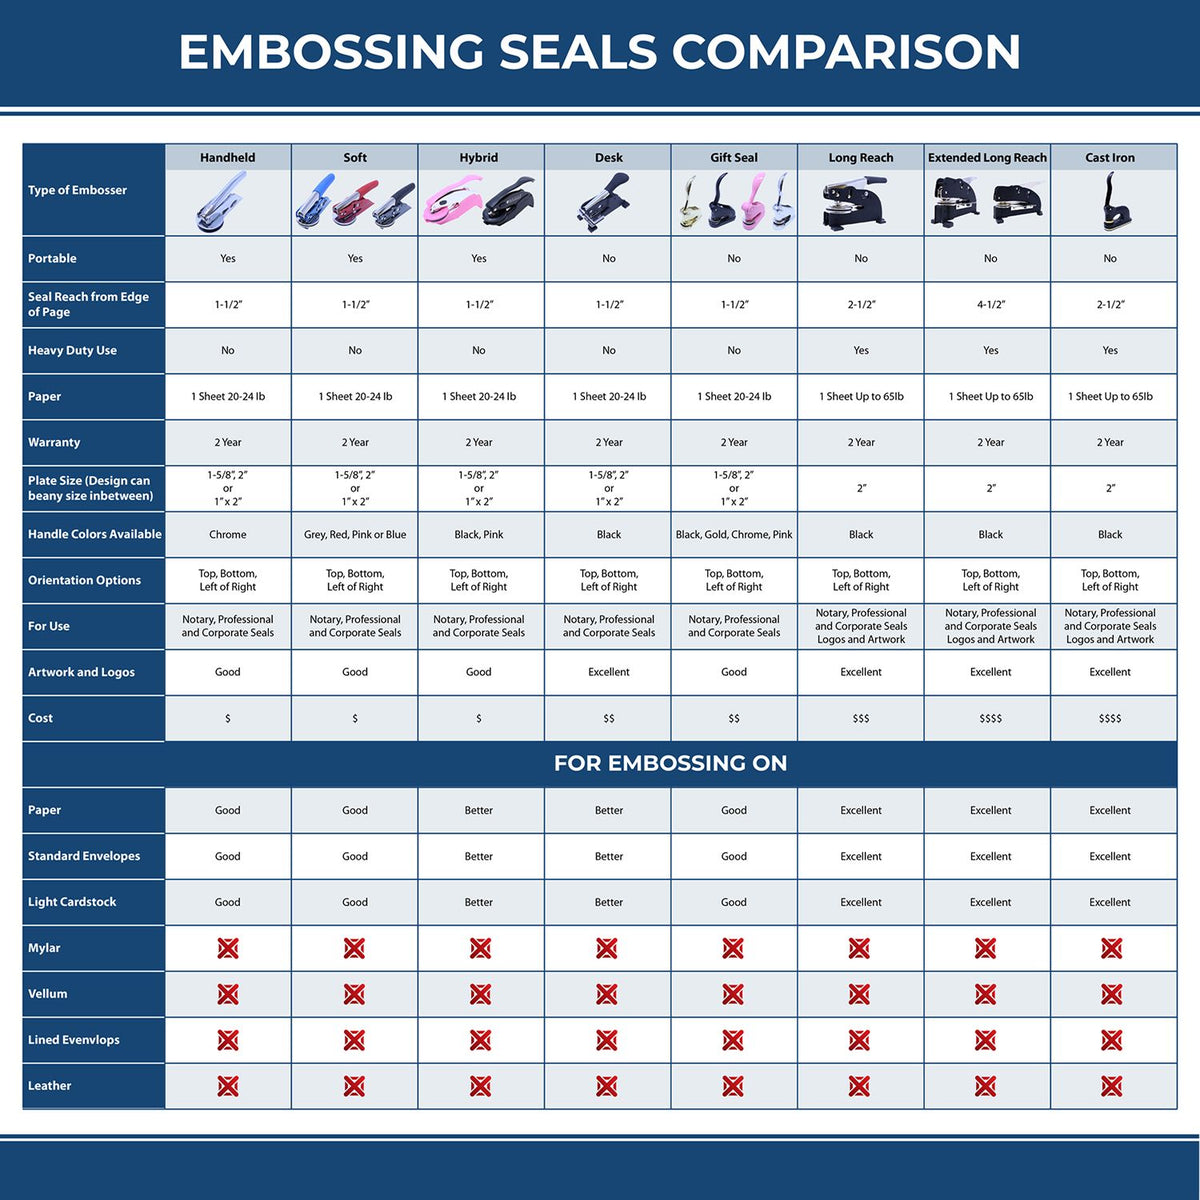 A comparison chart for the different types of mount models available for the Long Reach Missouri PE Seal.